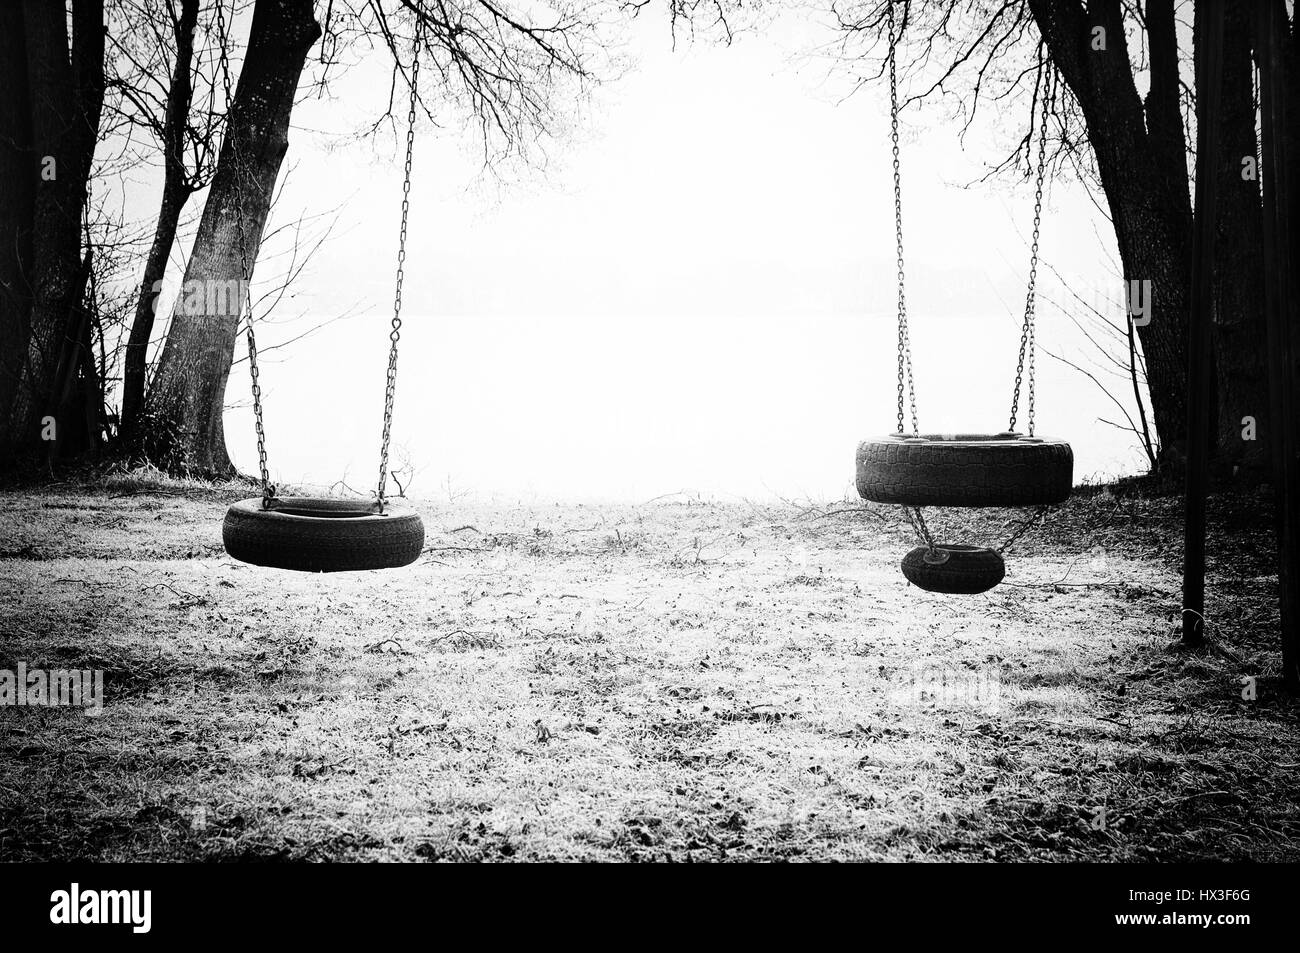 childhood memories photography black and white